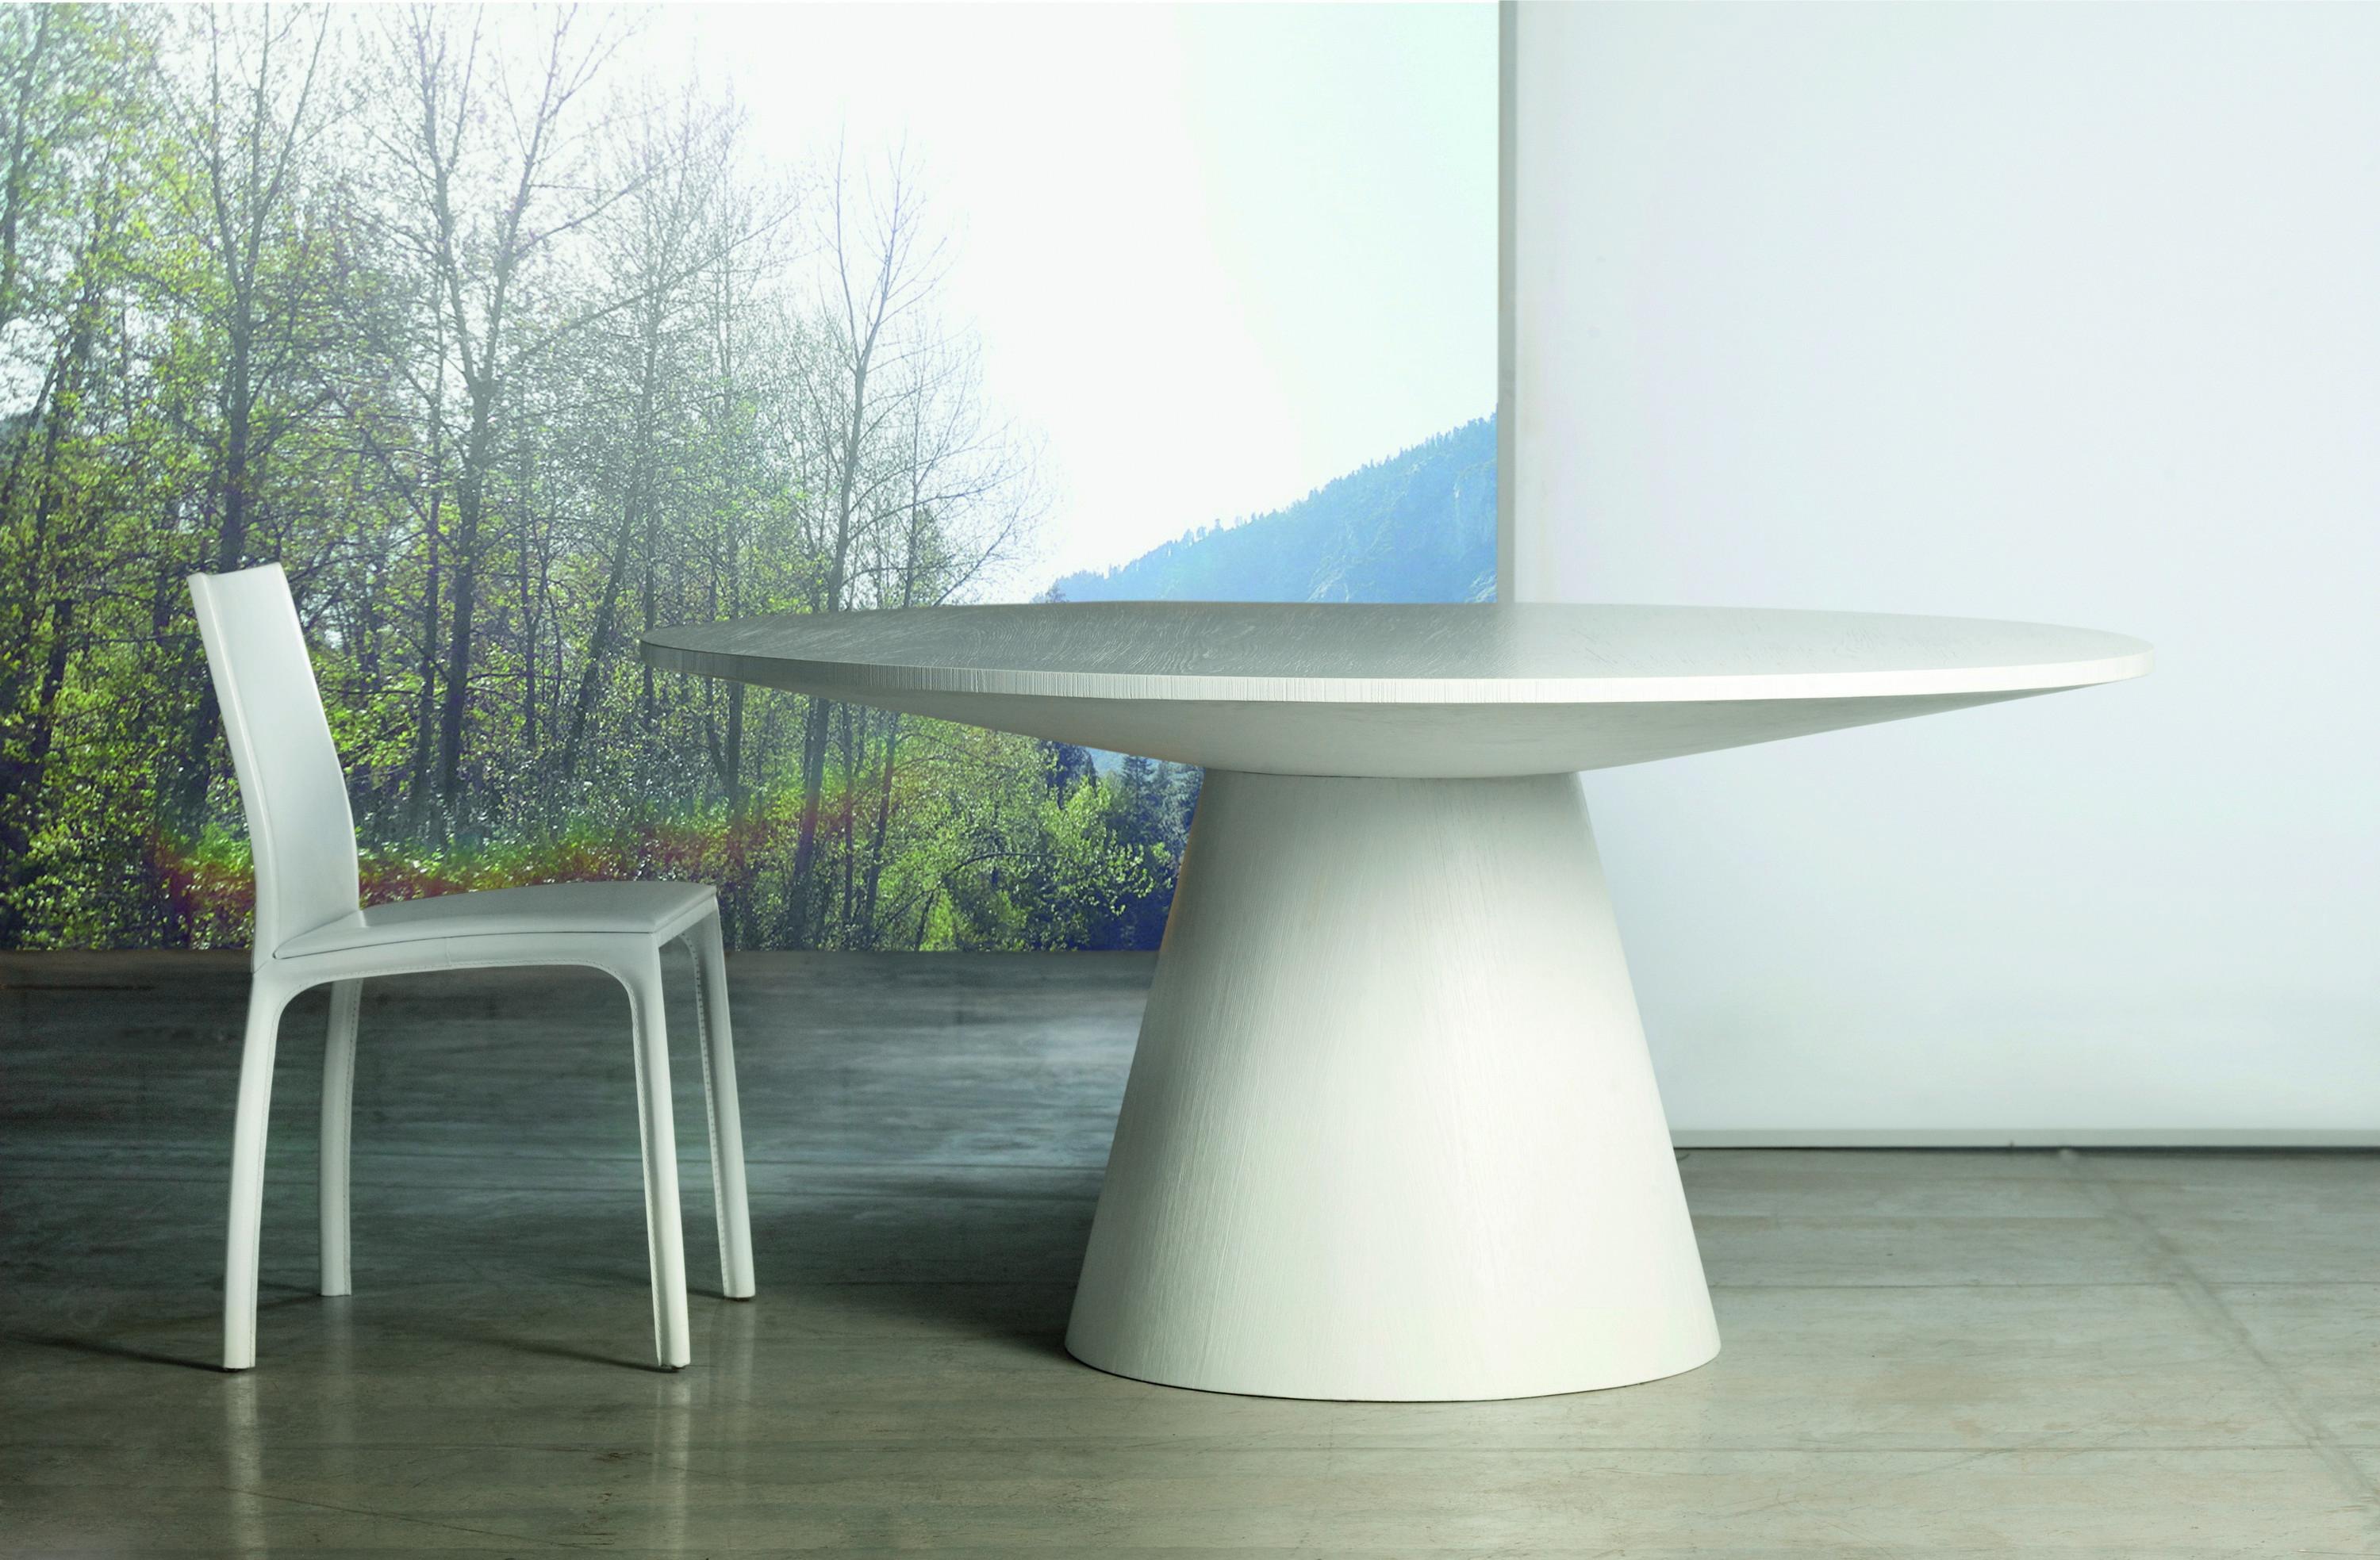 Eclipse Dining Table by Doimo Brasil
Dimensions: D 100 x H 75 cm 
Materials: Top: Veneer.

Also available in D 120, D 140, D 160, D 180. Please contact us.

With the intention of providing good taste and personality, Doimo deciphers trends and